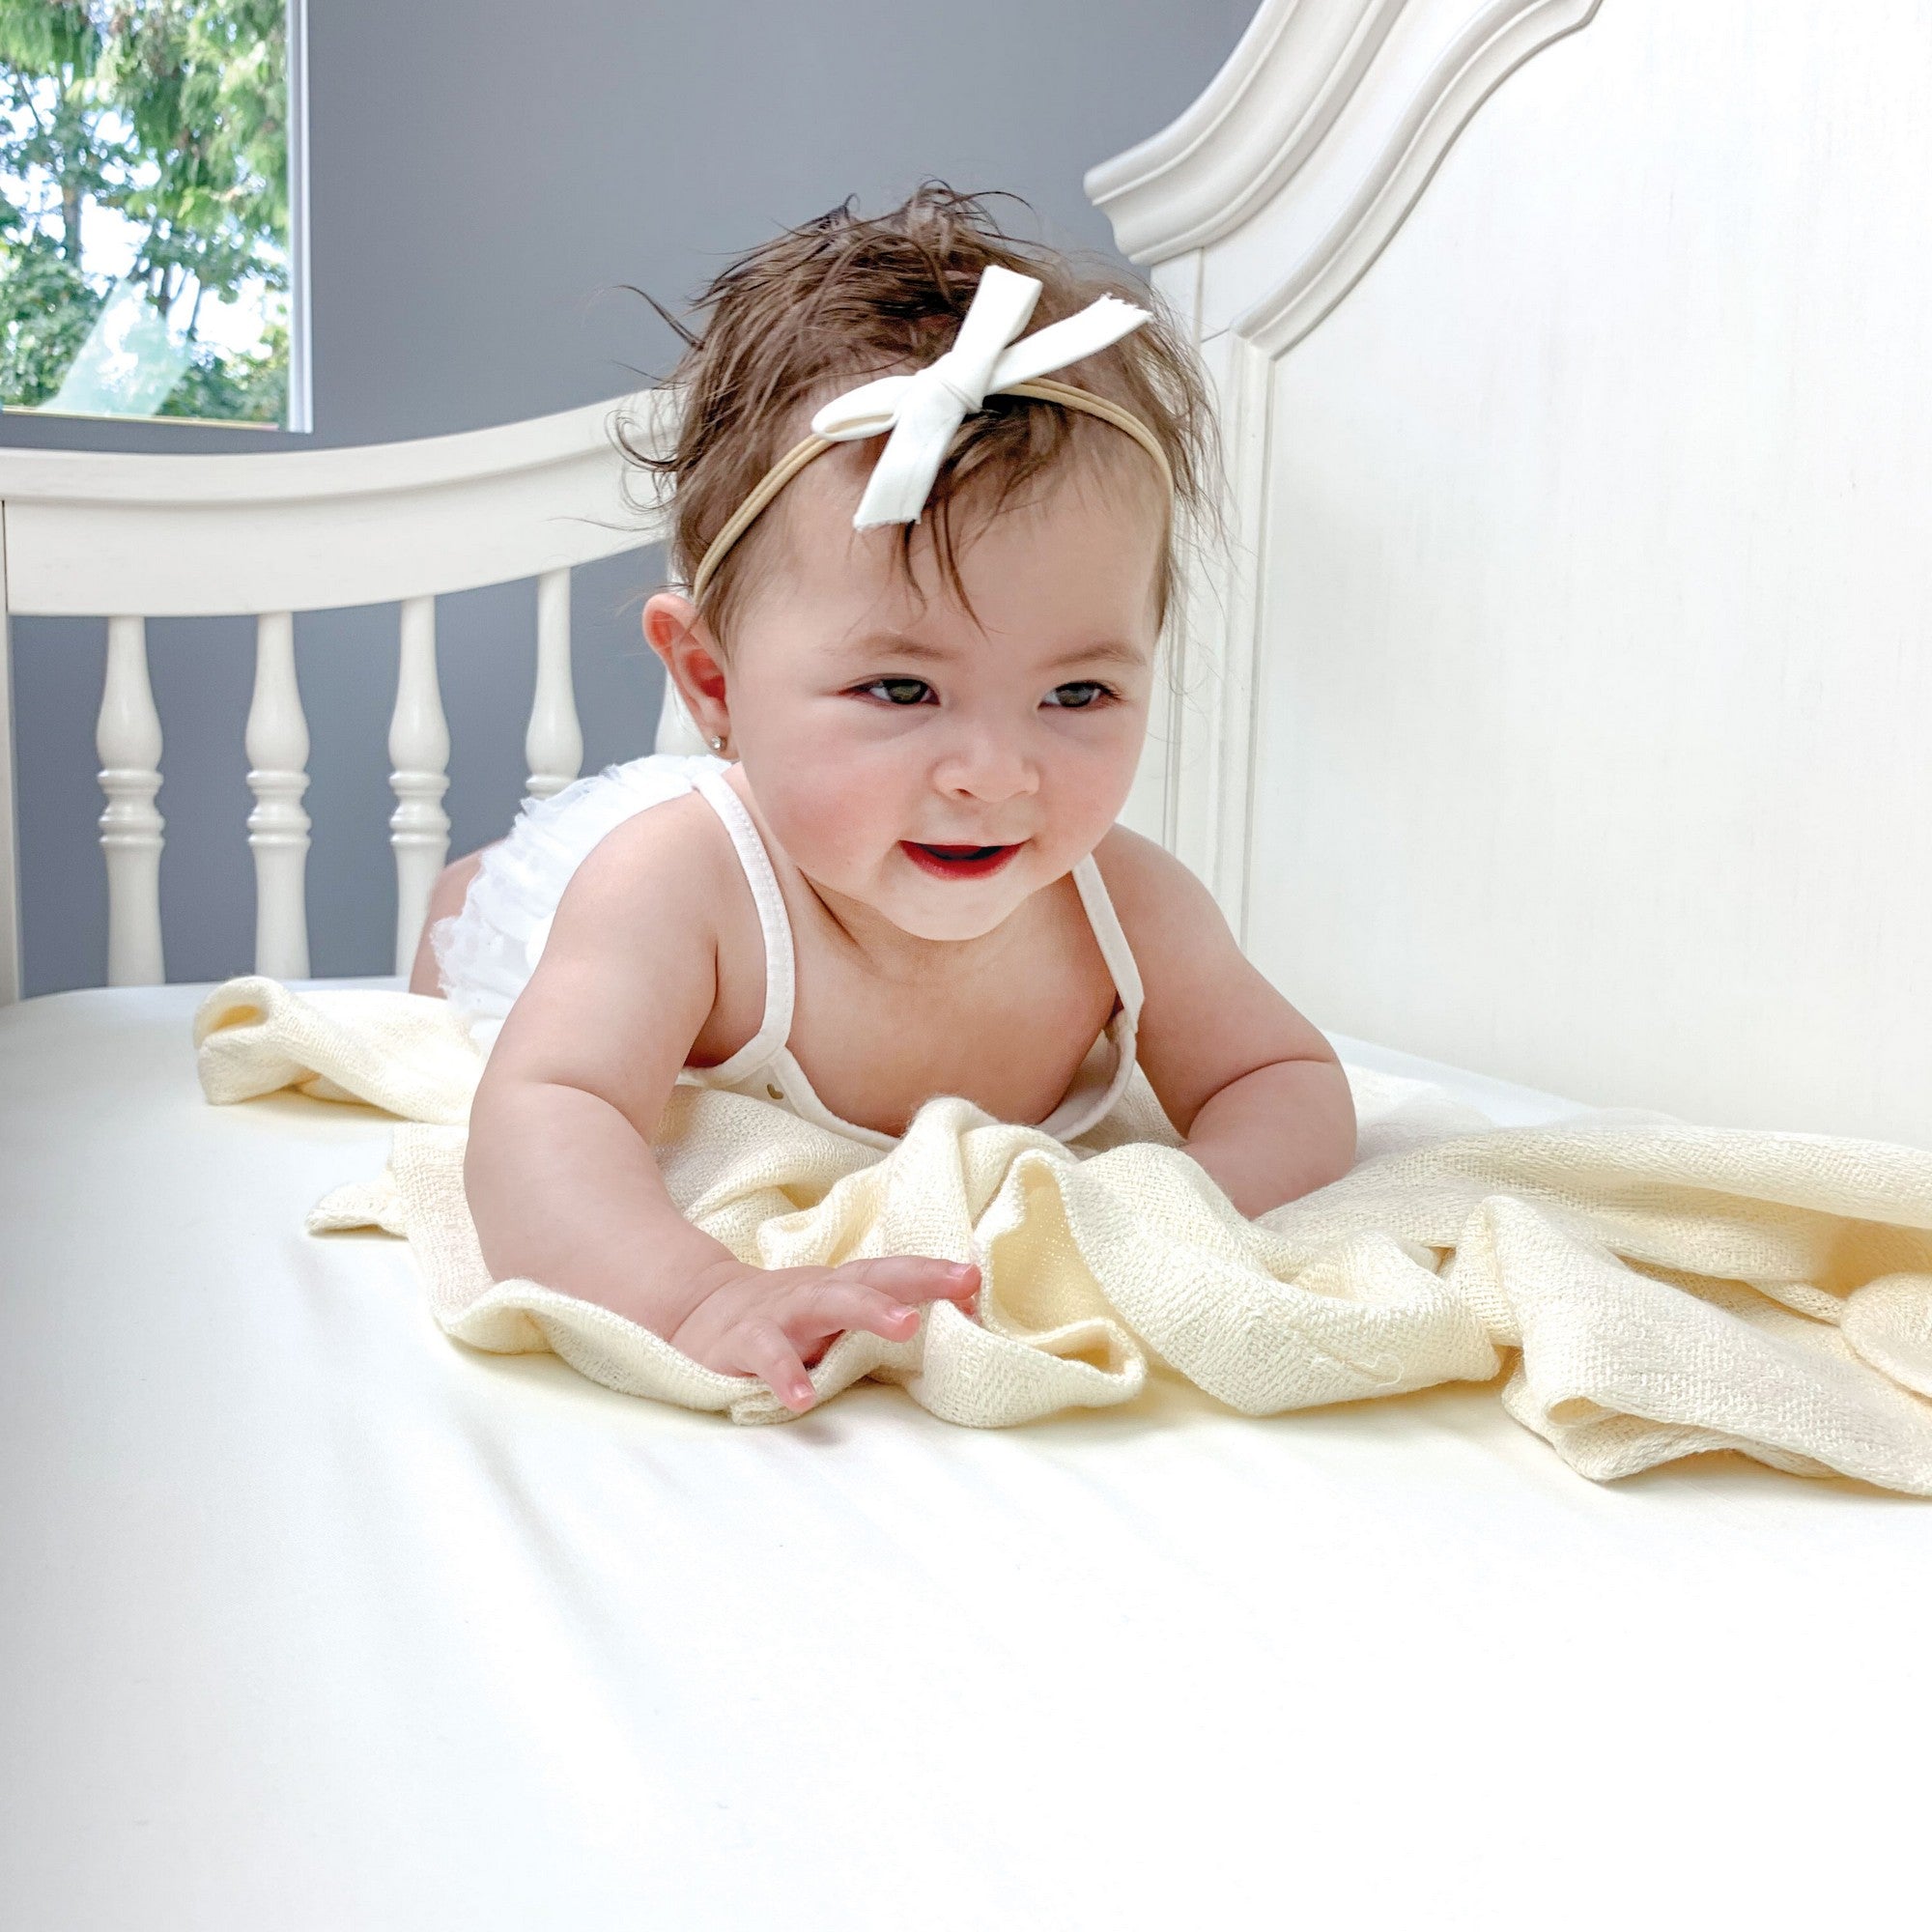 Panda Baby 100% BAMBOO Fitted Crib Sheet - Resistant to Bacteria, Comfortable for Baby to Sleep Fresher - Ivory